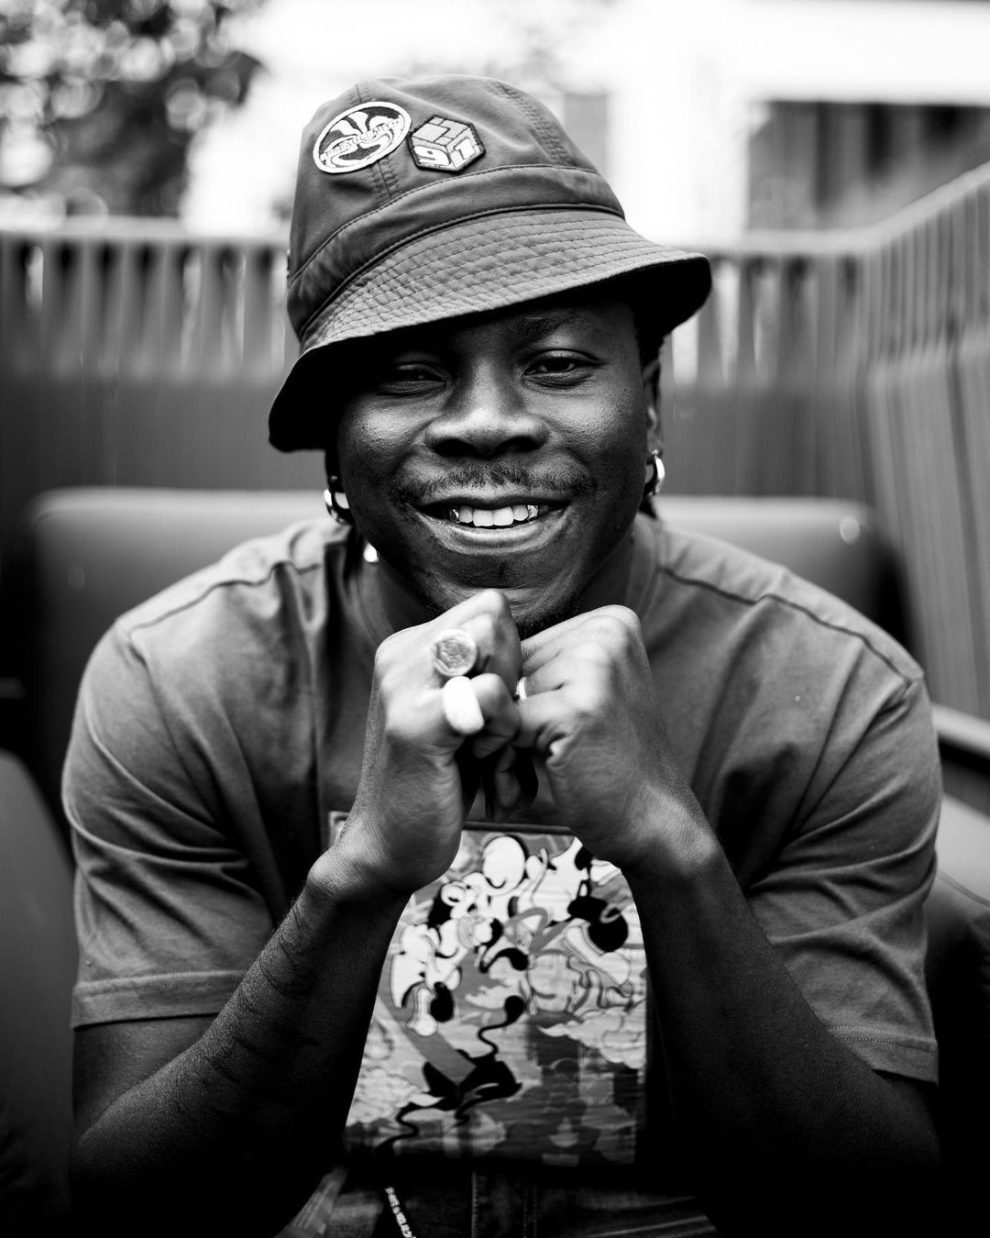 Download MP3 Stonebwoy Therapy Acoustic Version Hitz360 com mp3 image